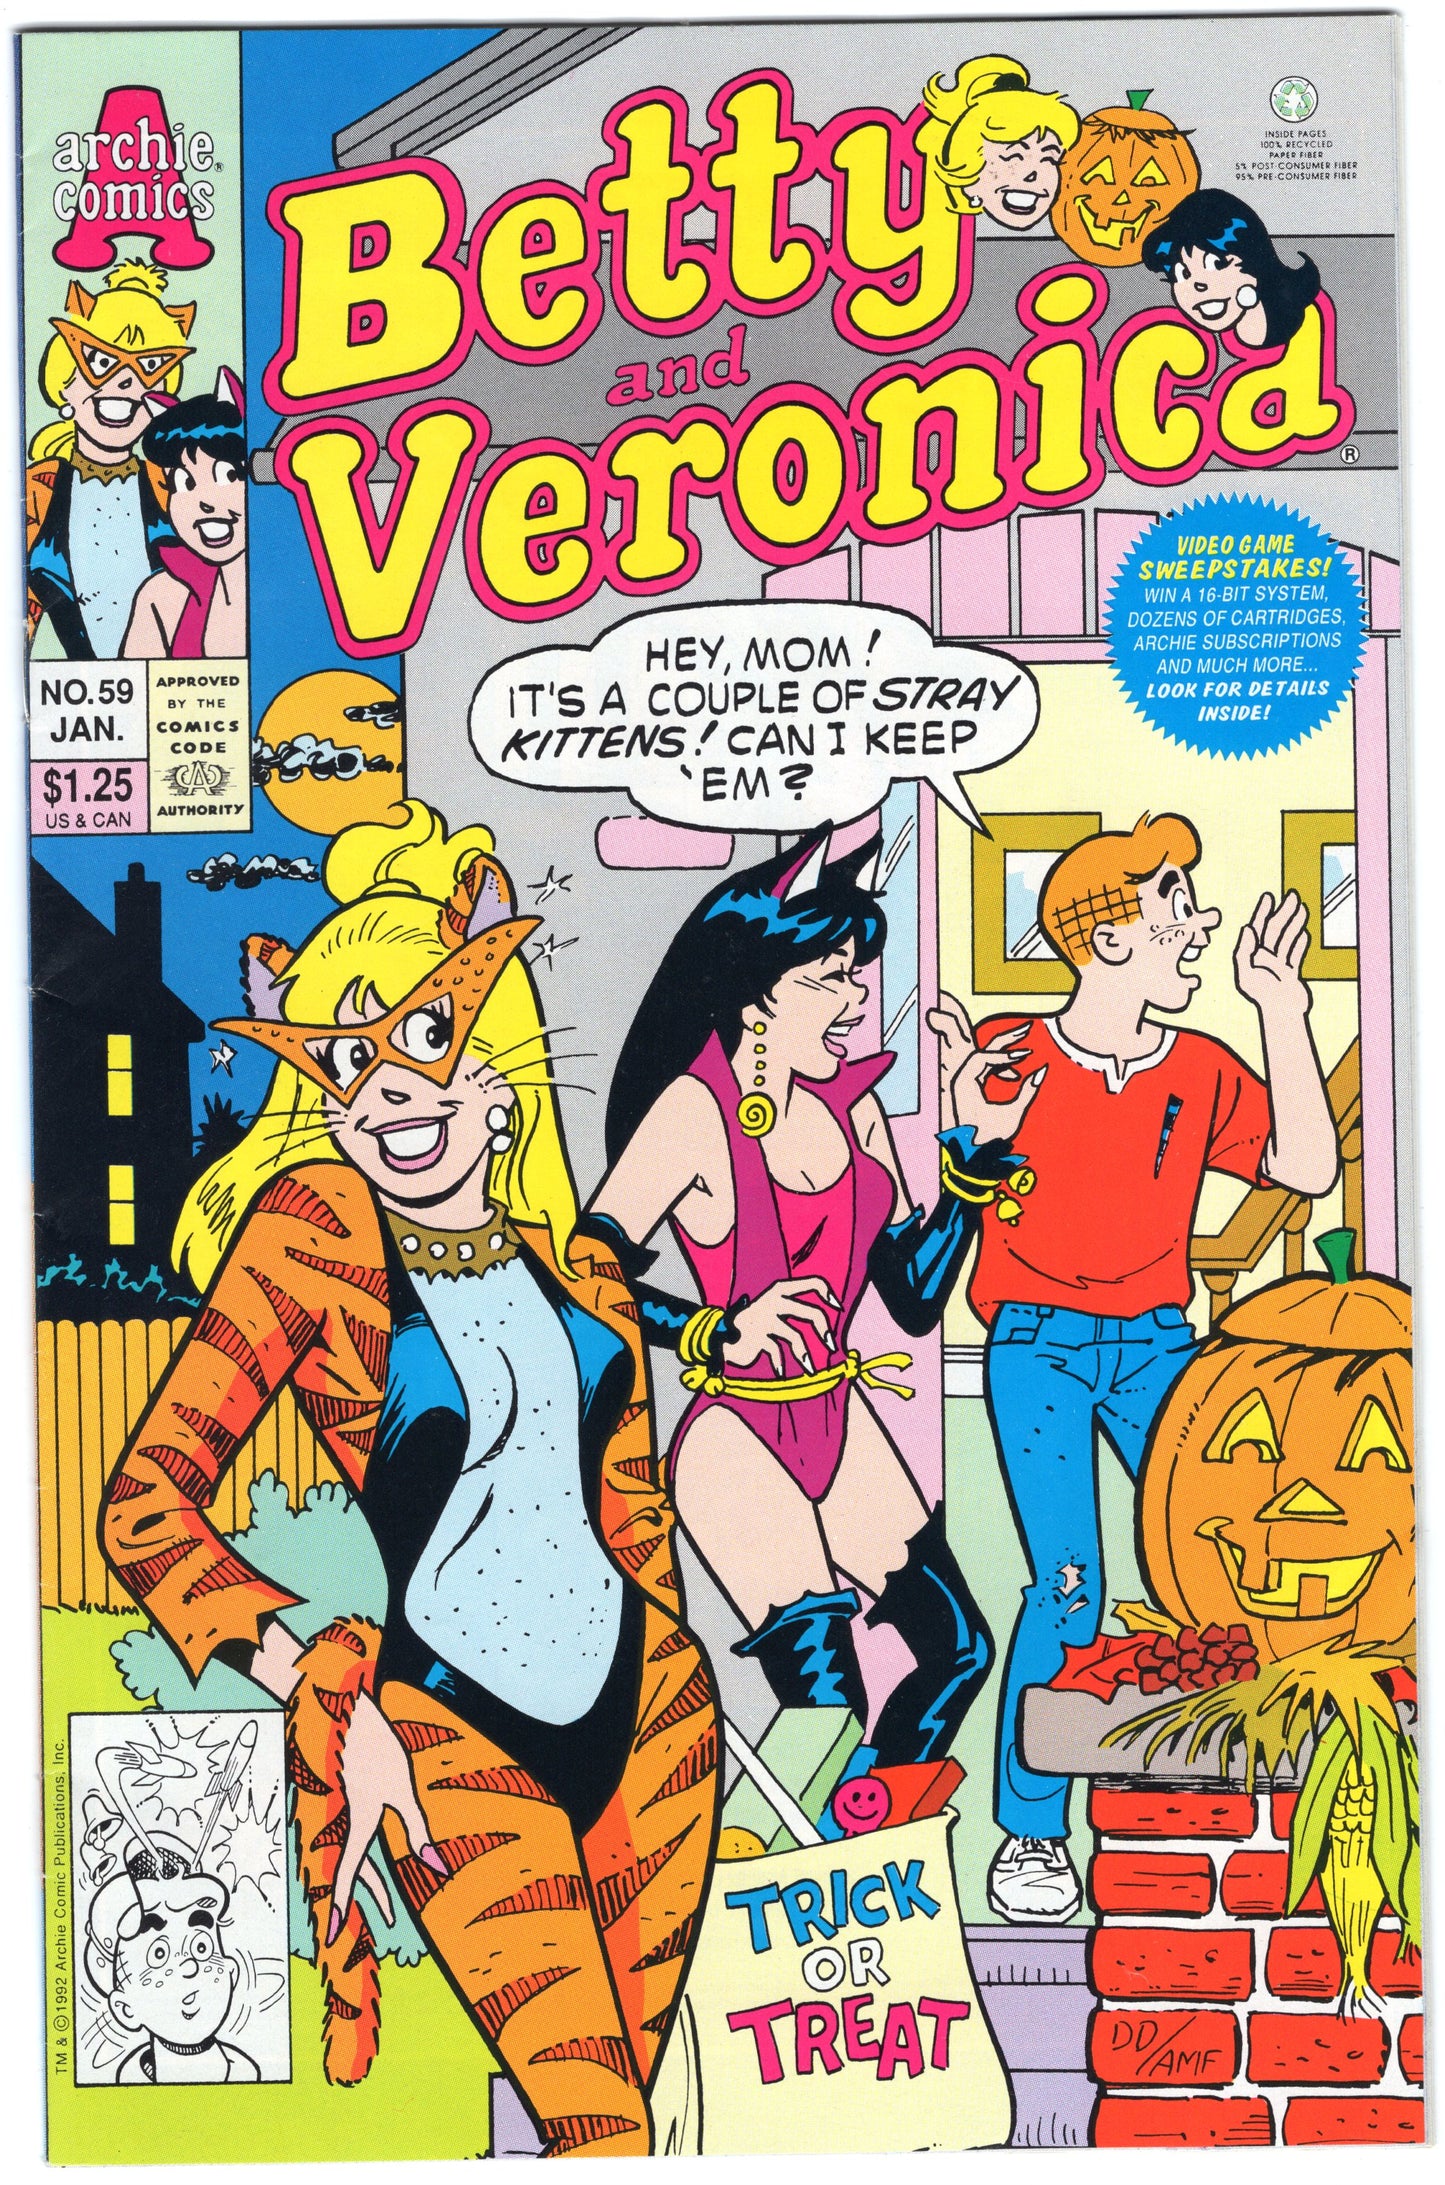 Betty and Veronica - Issue #59 (Jan. 1993 - Archie Comics) FN/VF